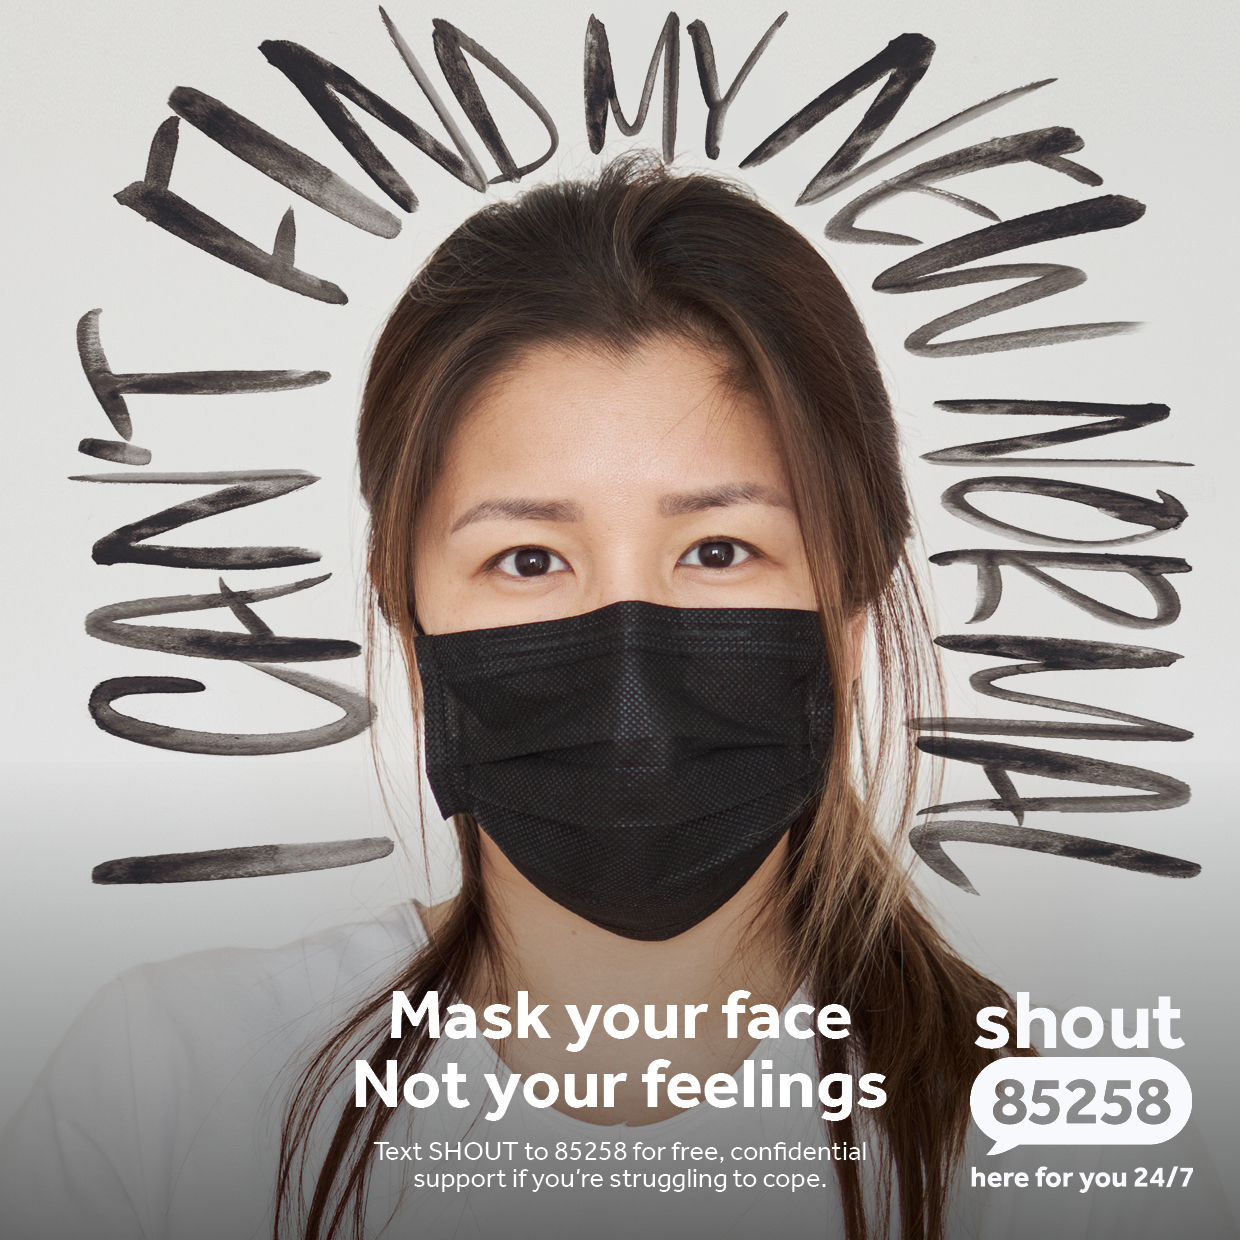 How to tell someone you re struggling with mental health World Mental Health Day 2020 Mask Your Face Not Your Feelings Shout 85258